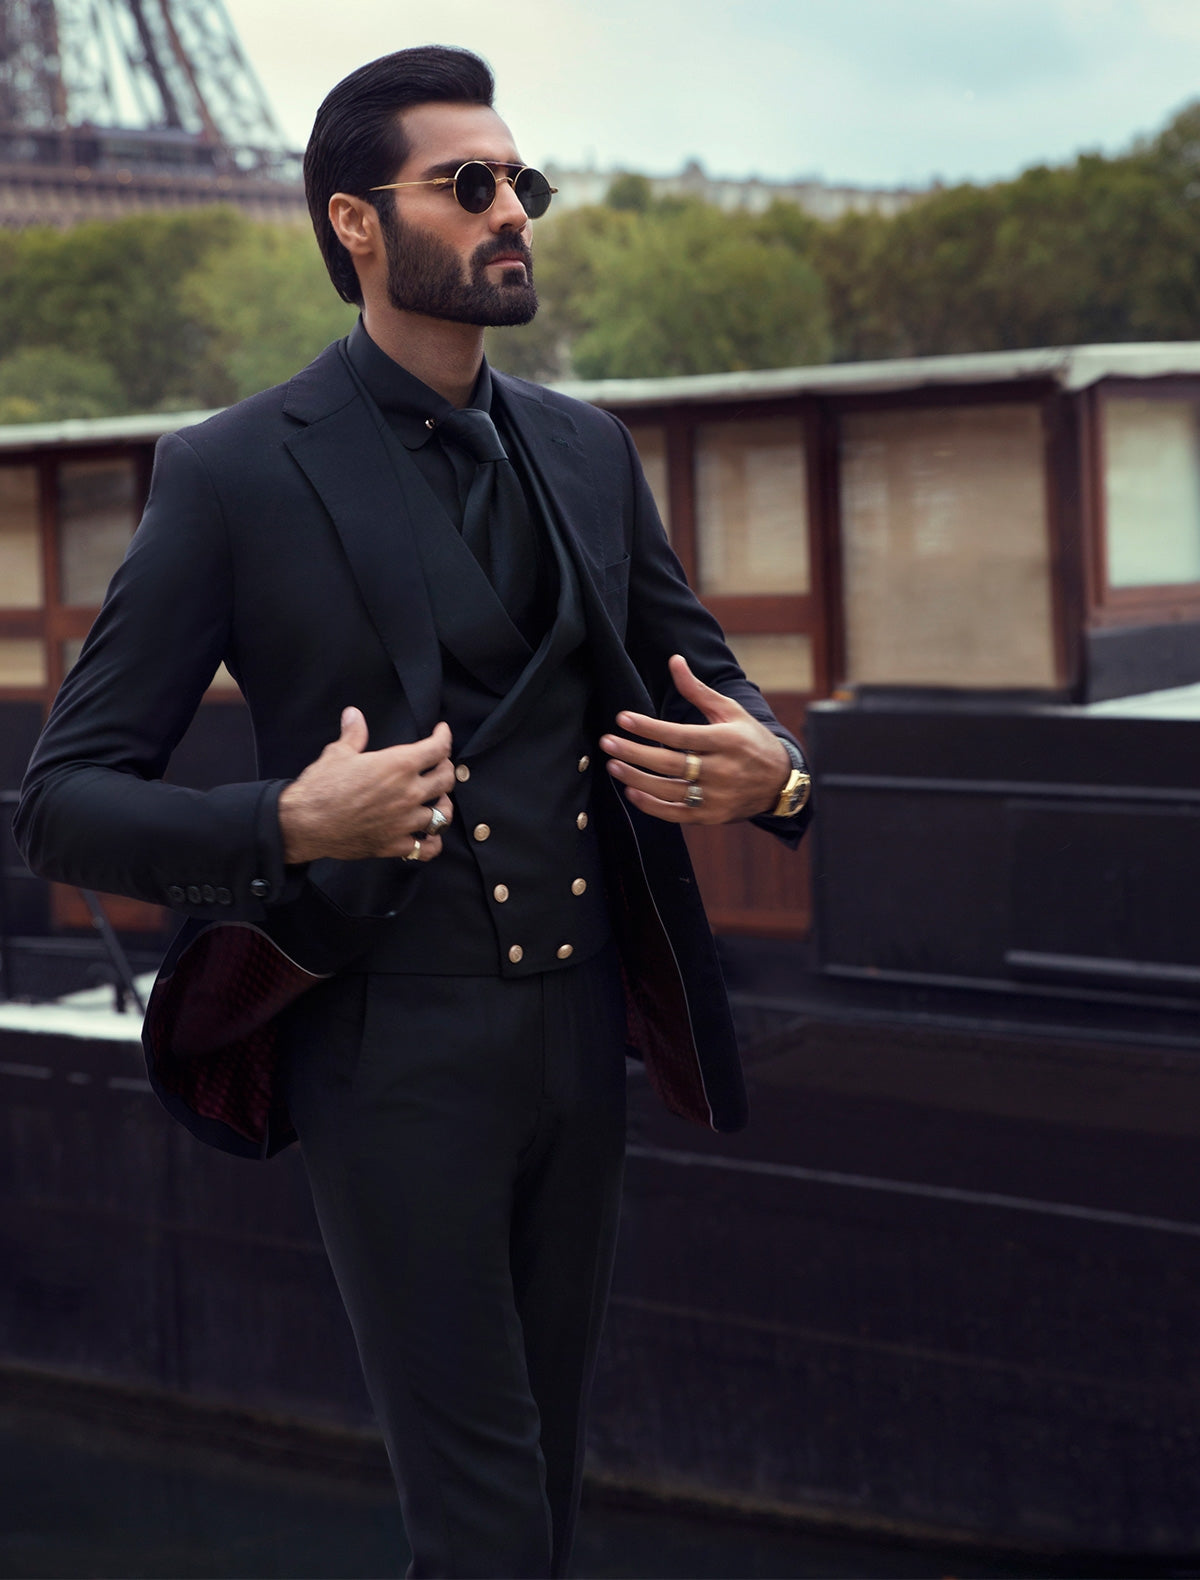 CLASSIC BLACK TWO BUTTONS SUIT